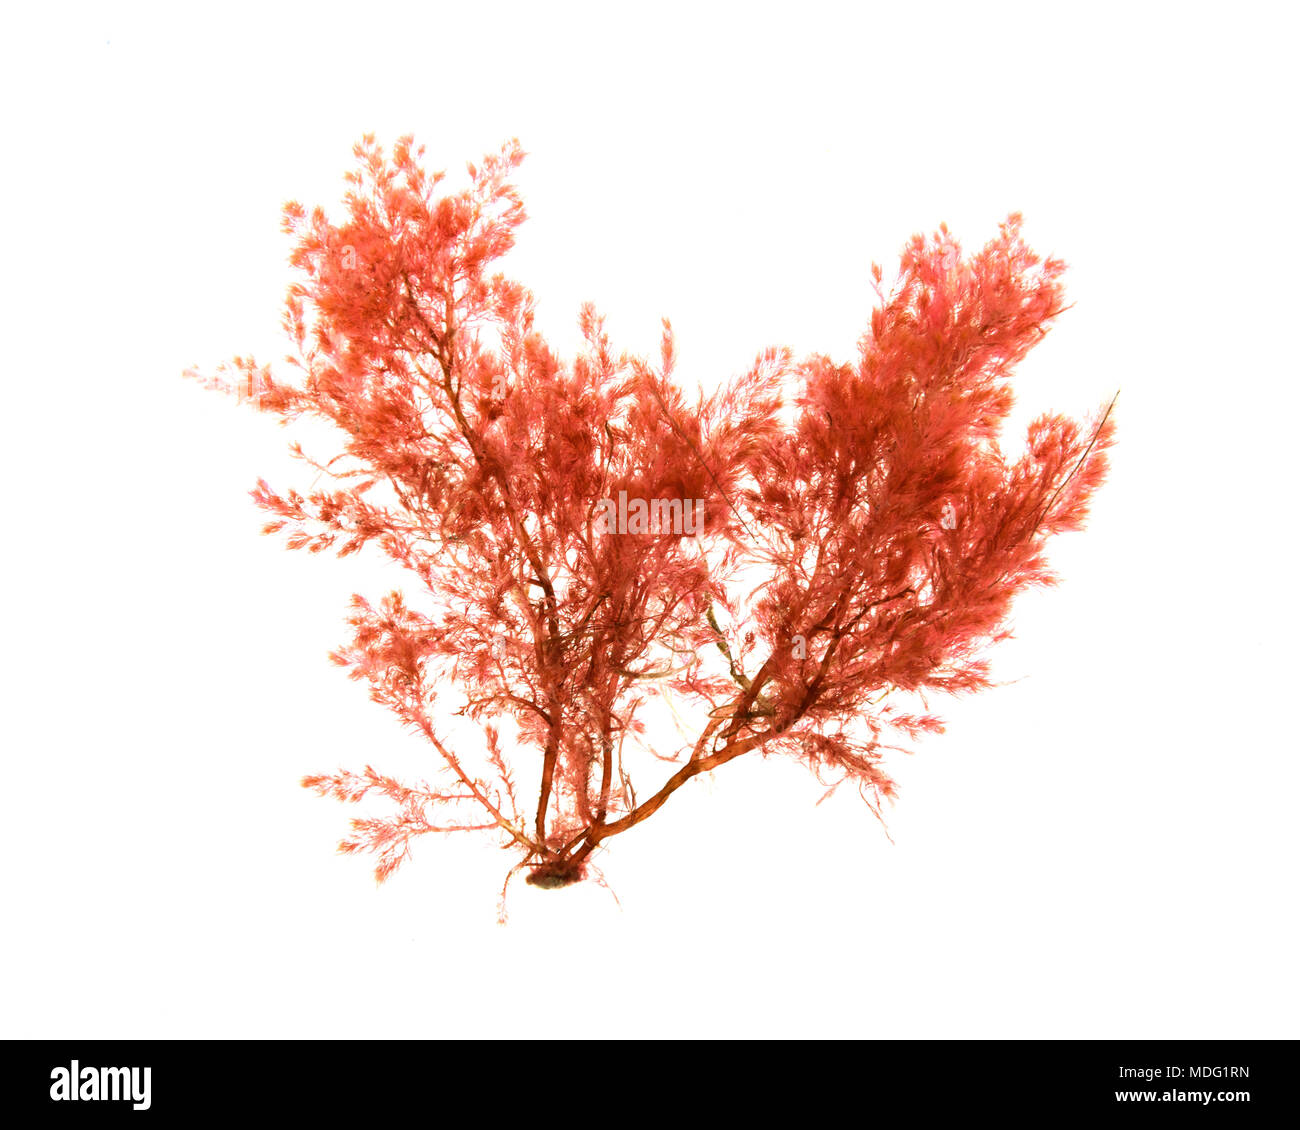 Unidentified red alga, possibly Heterosiphonia sp., floating in water and lit from behind on a white background Stock Photo